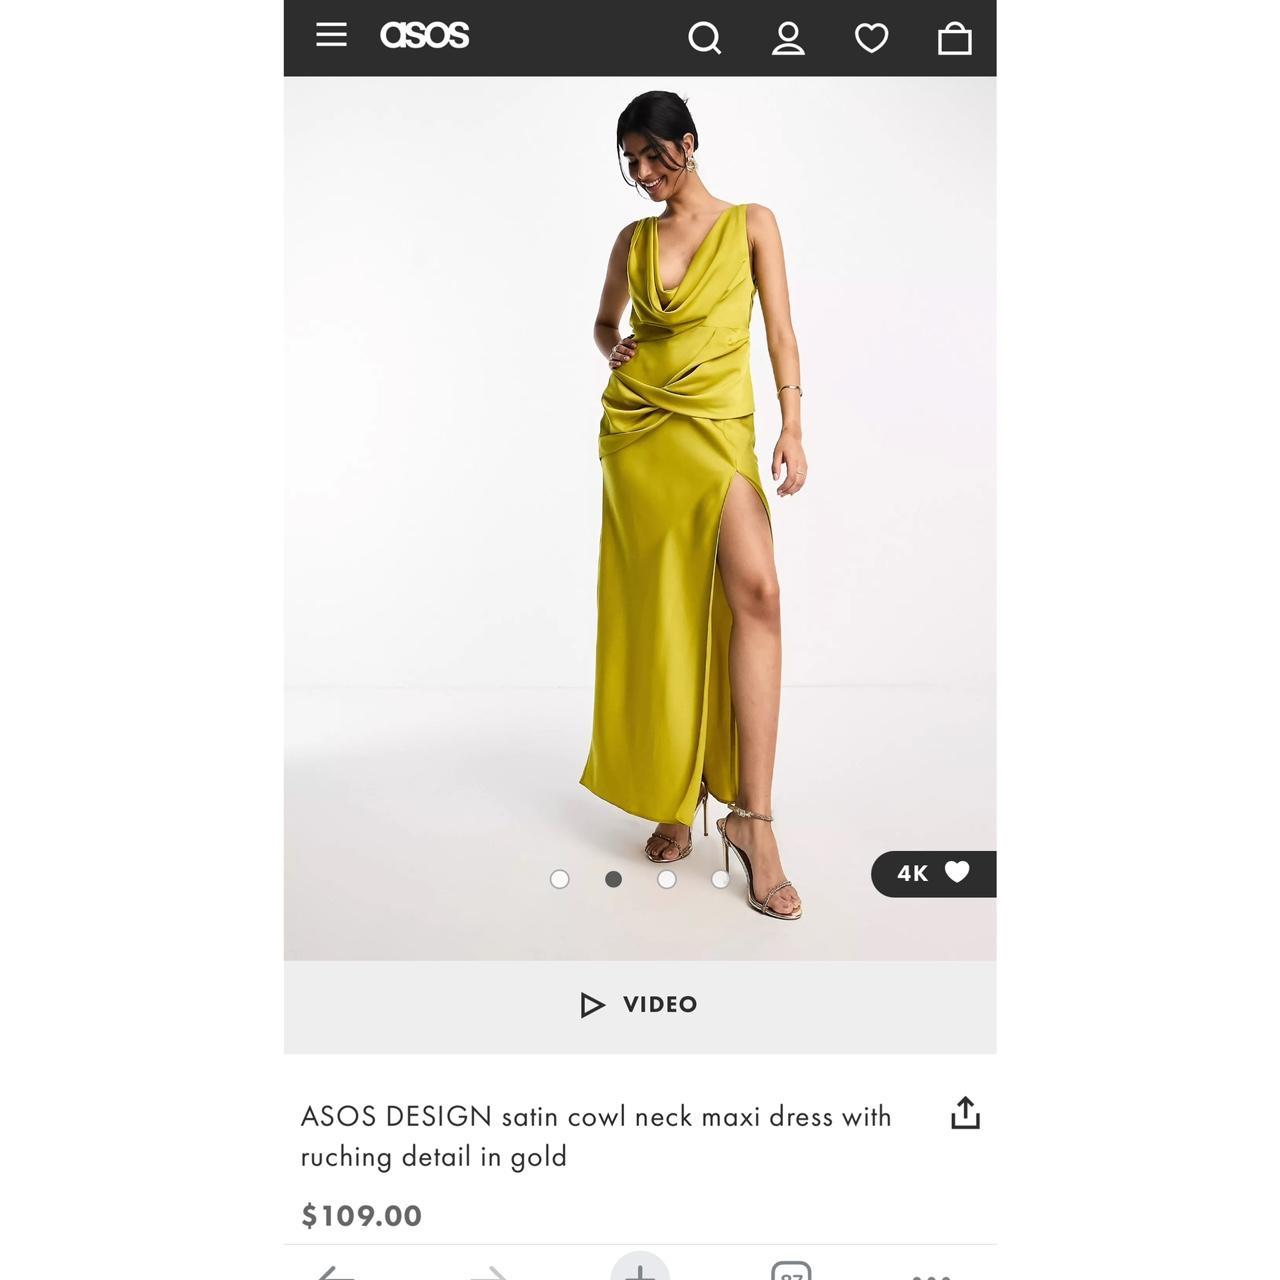 ASOS DESIGN satin cowl neck maxi dress with ruching detail in gold